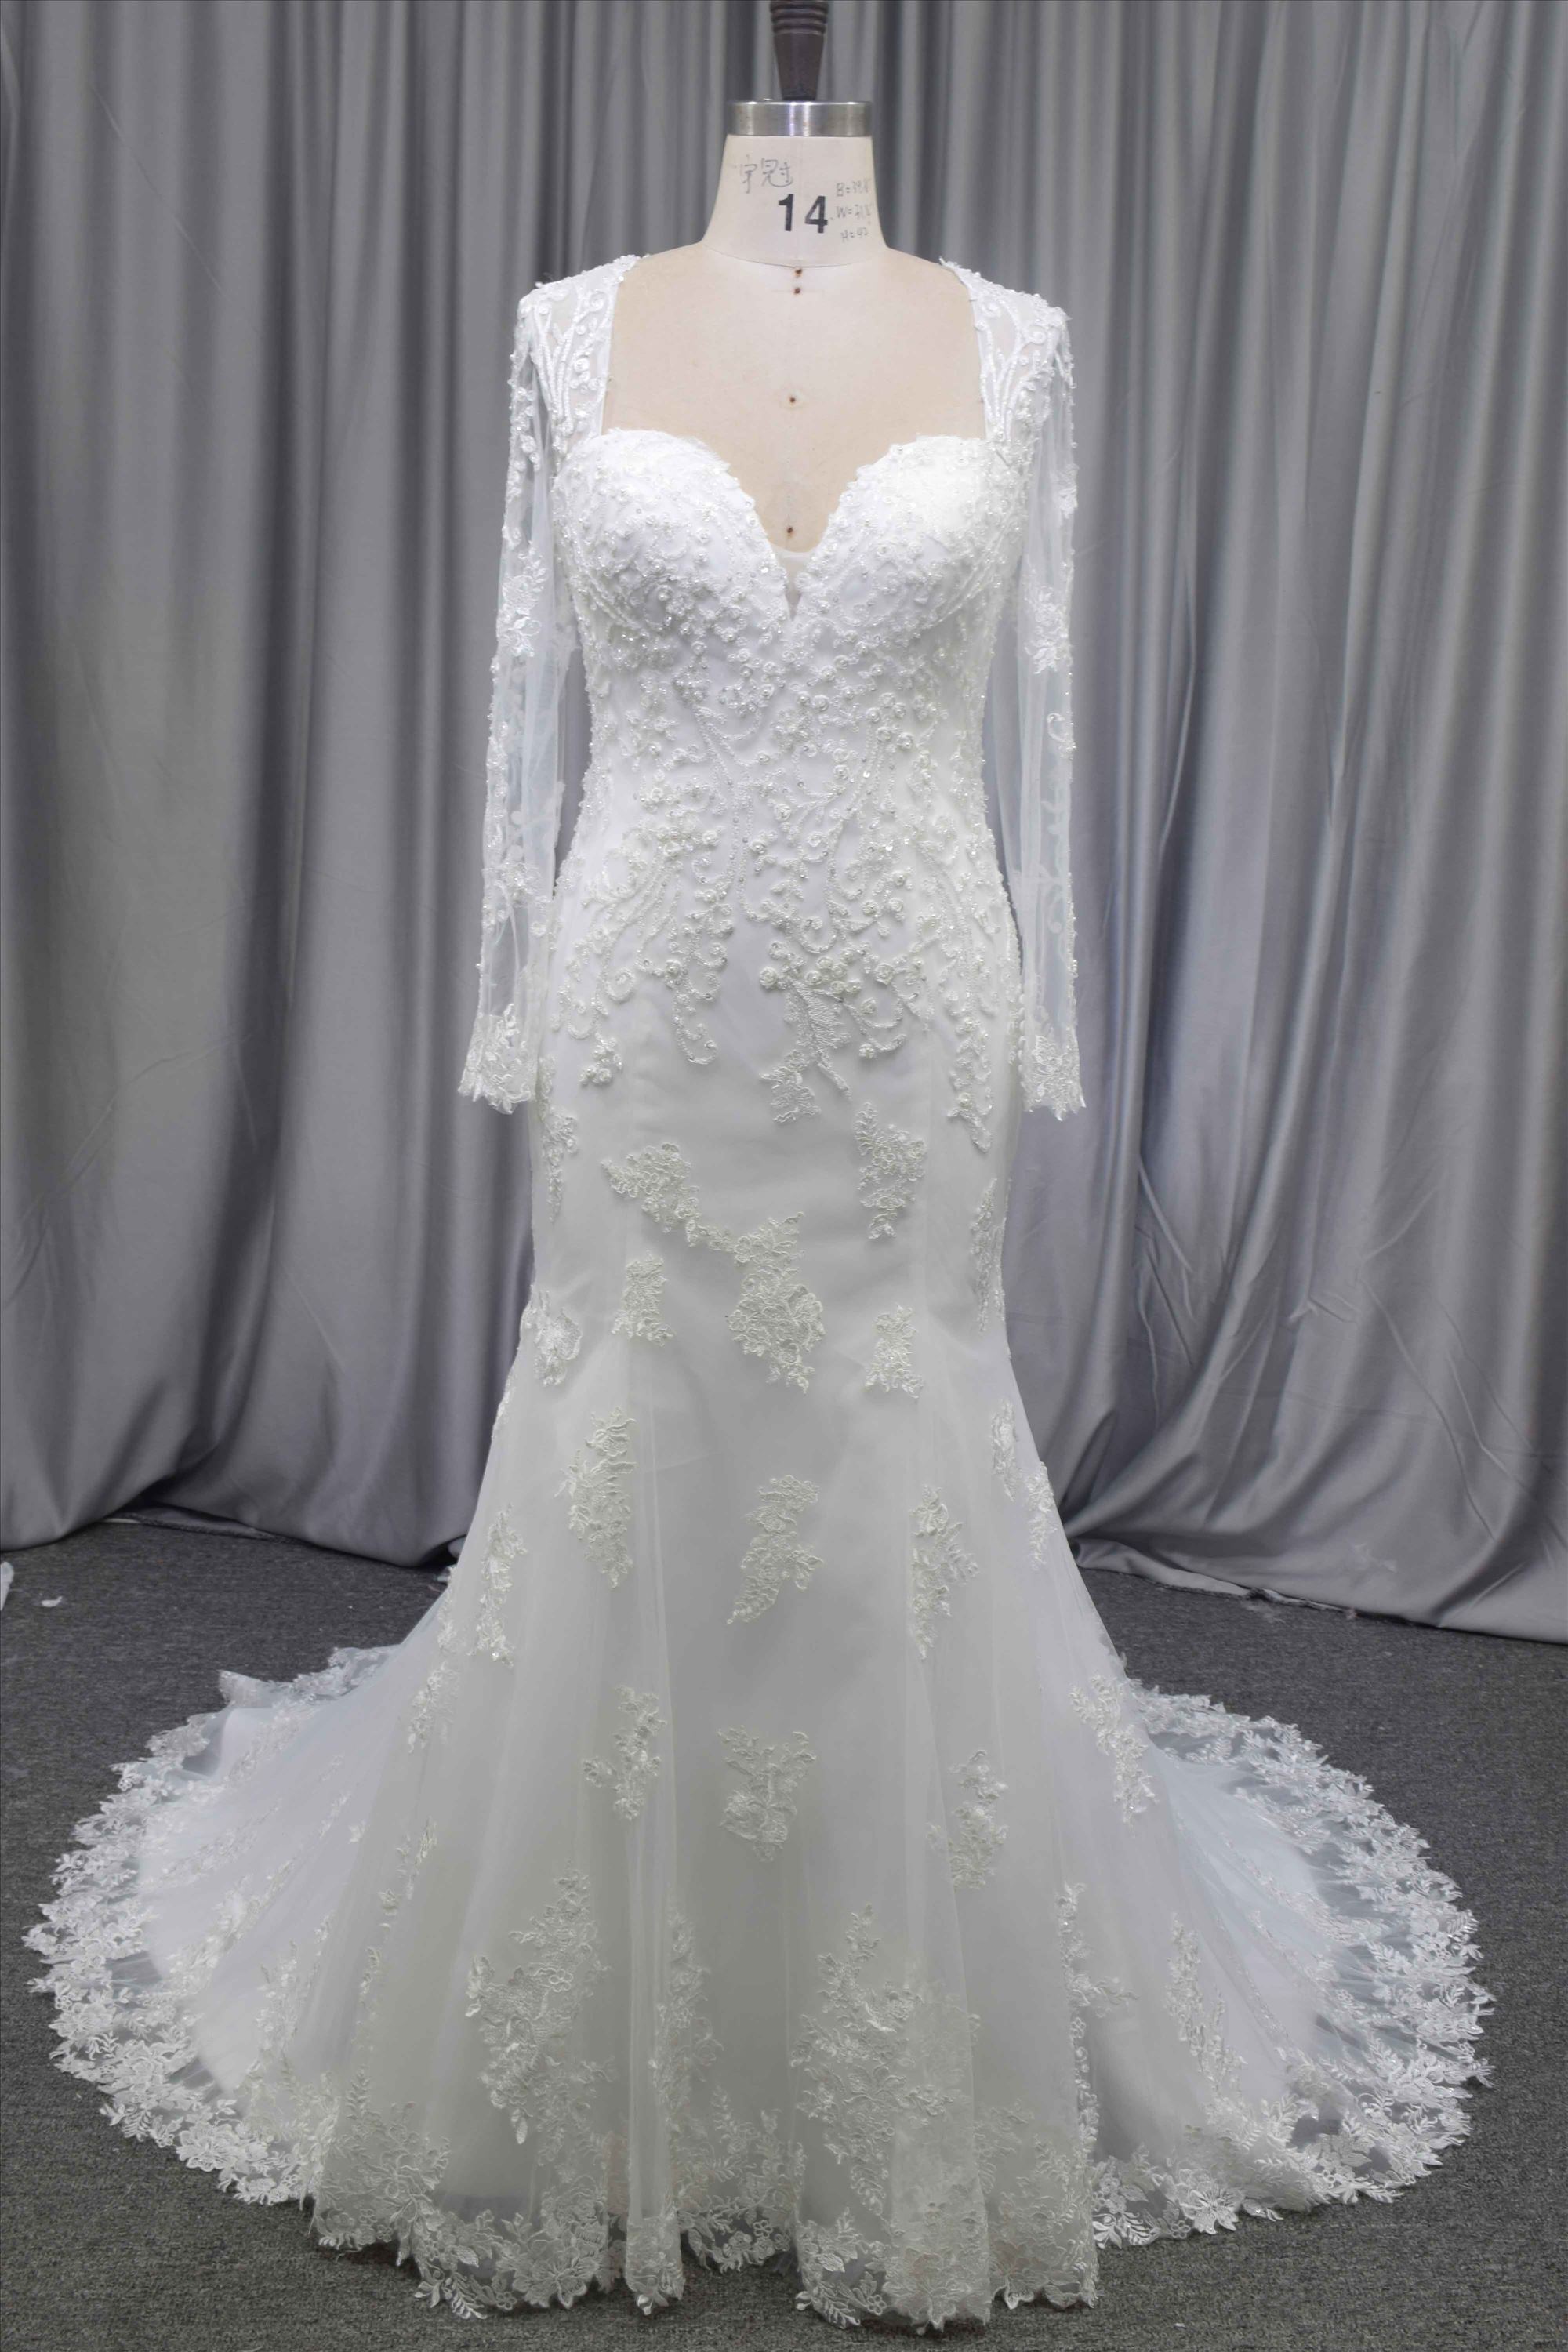 Sweetheart neckline long sleeves bridal dress wholesale price bridal gown